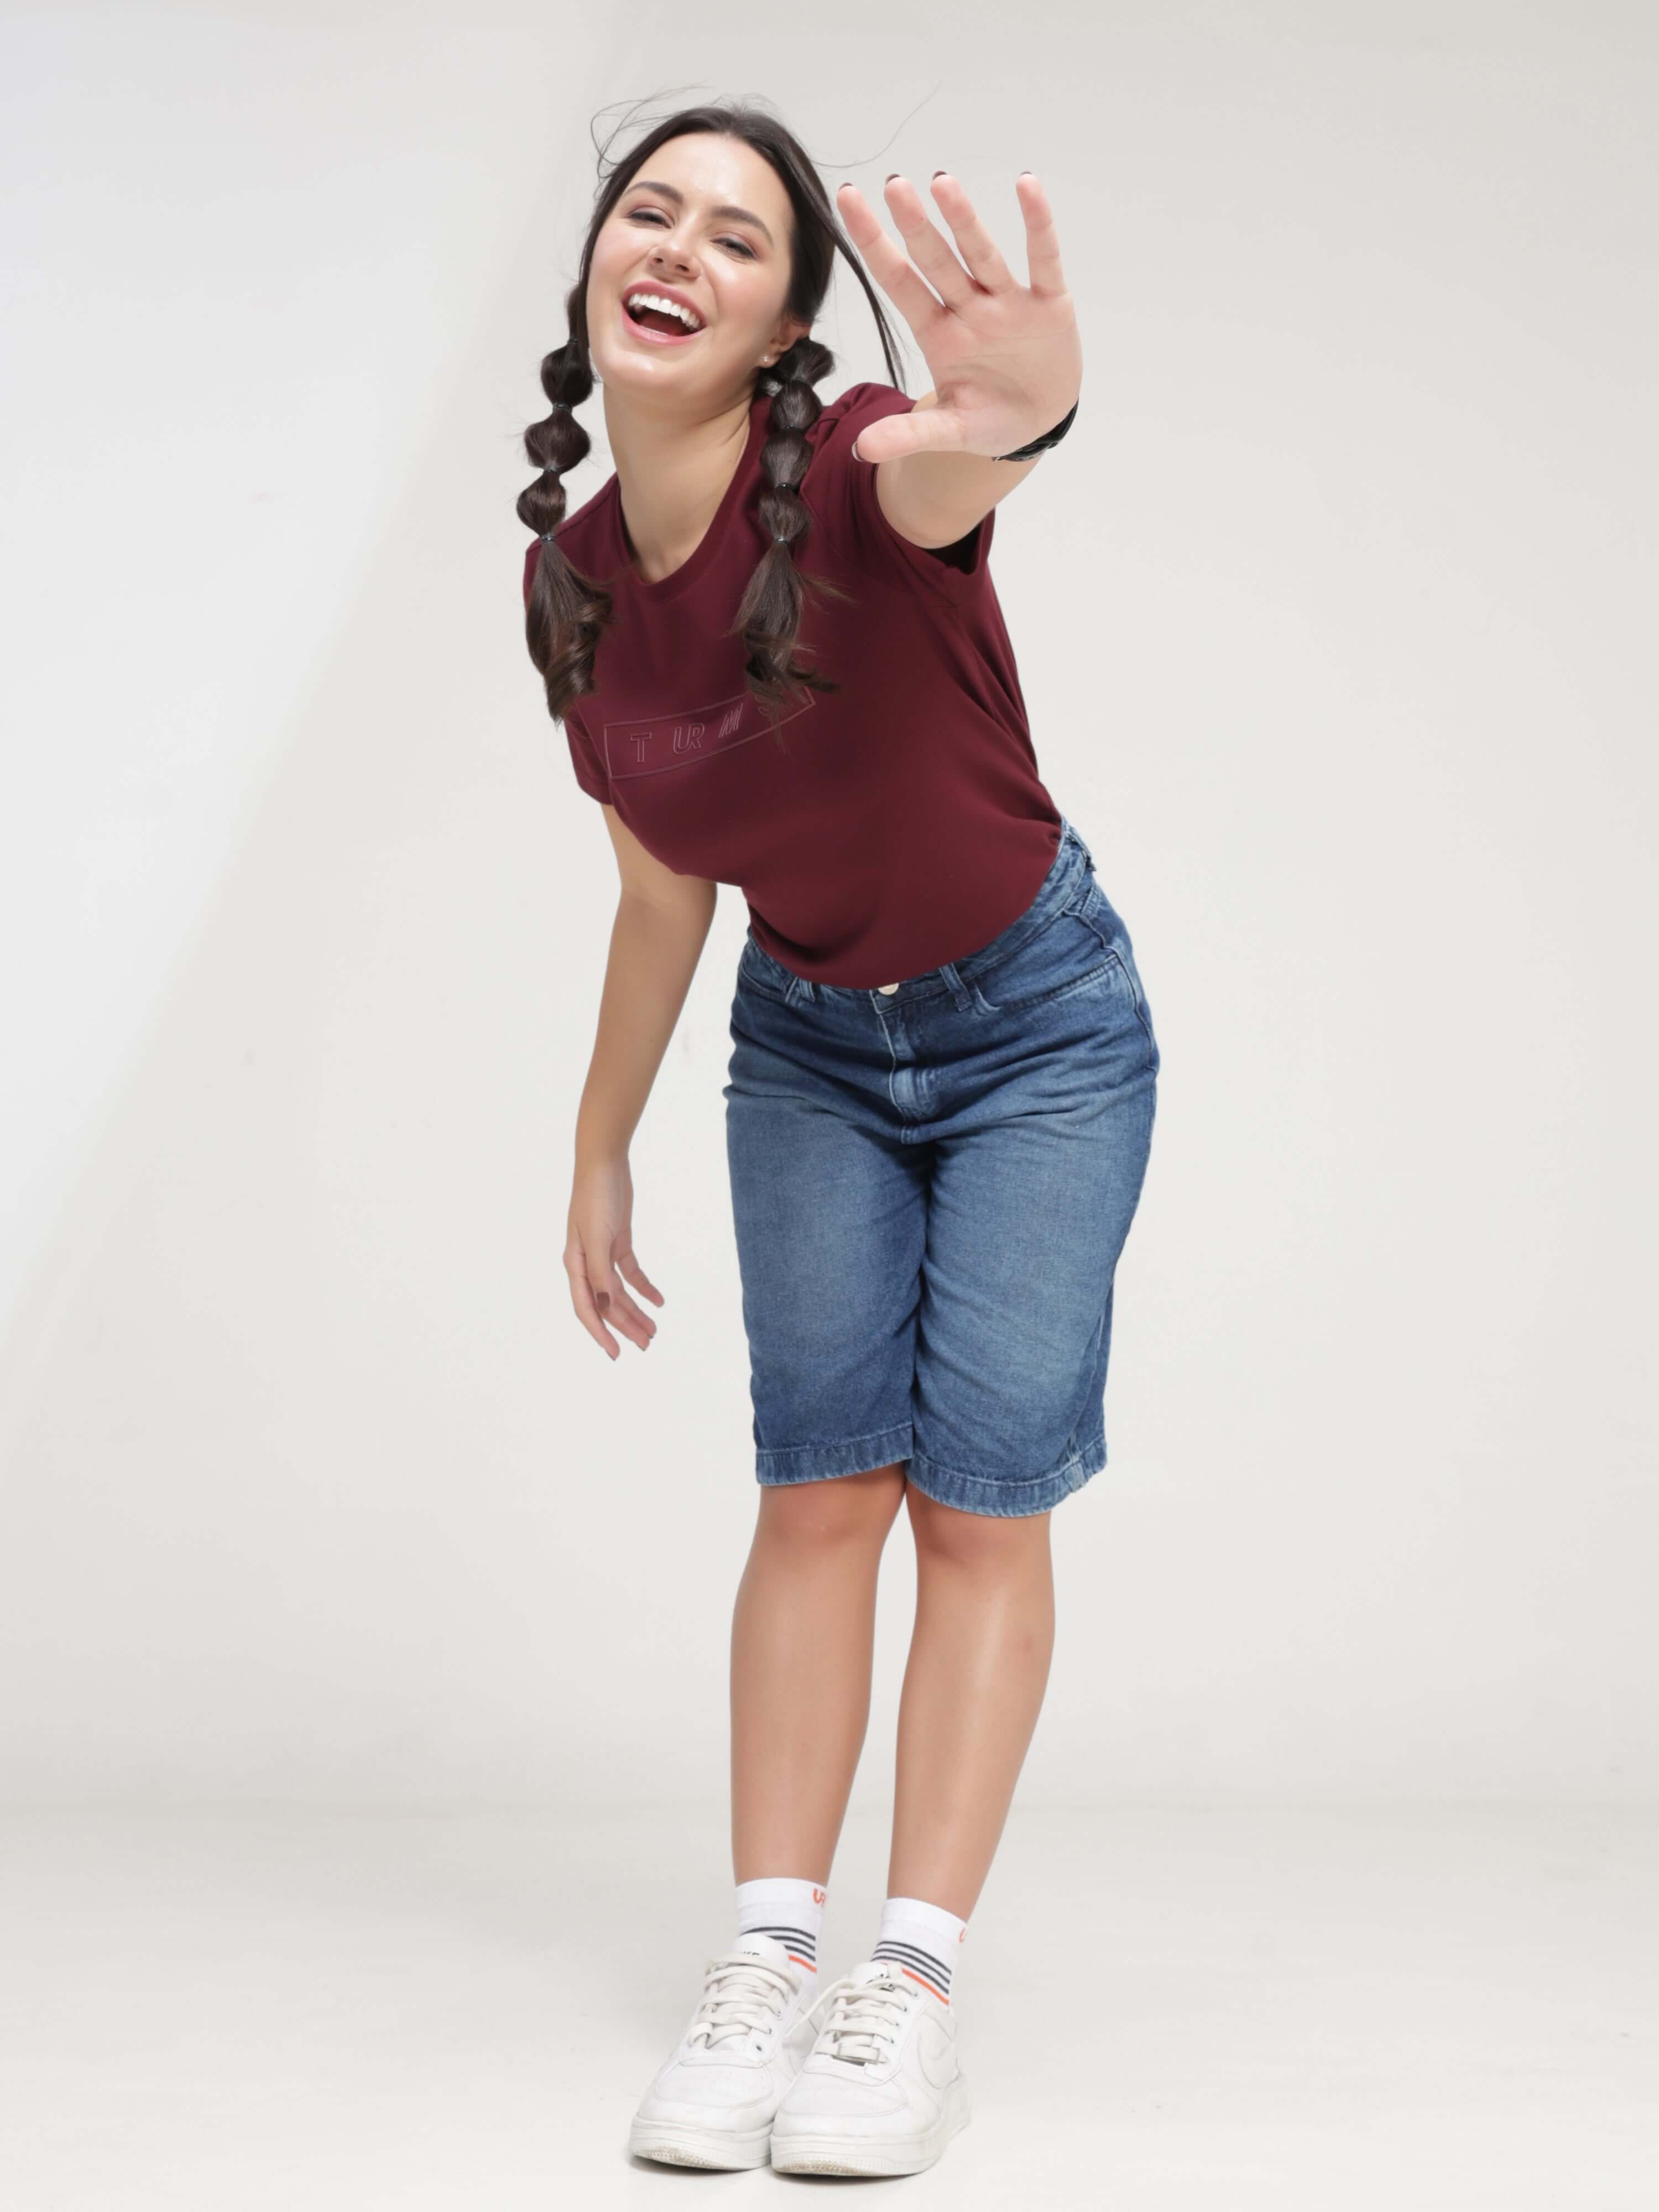 Woman wearing Burgundy Elite round-neck Turms T-shirt and denim shorts, showcasing anti-stain, anti-odor, and stretchable intelligent apparel.